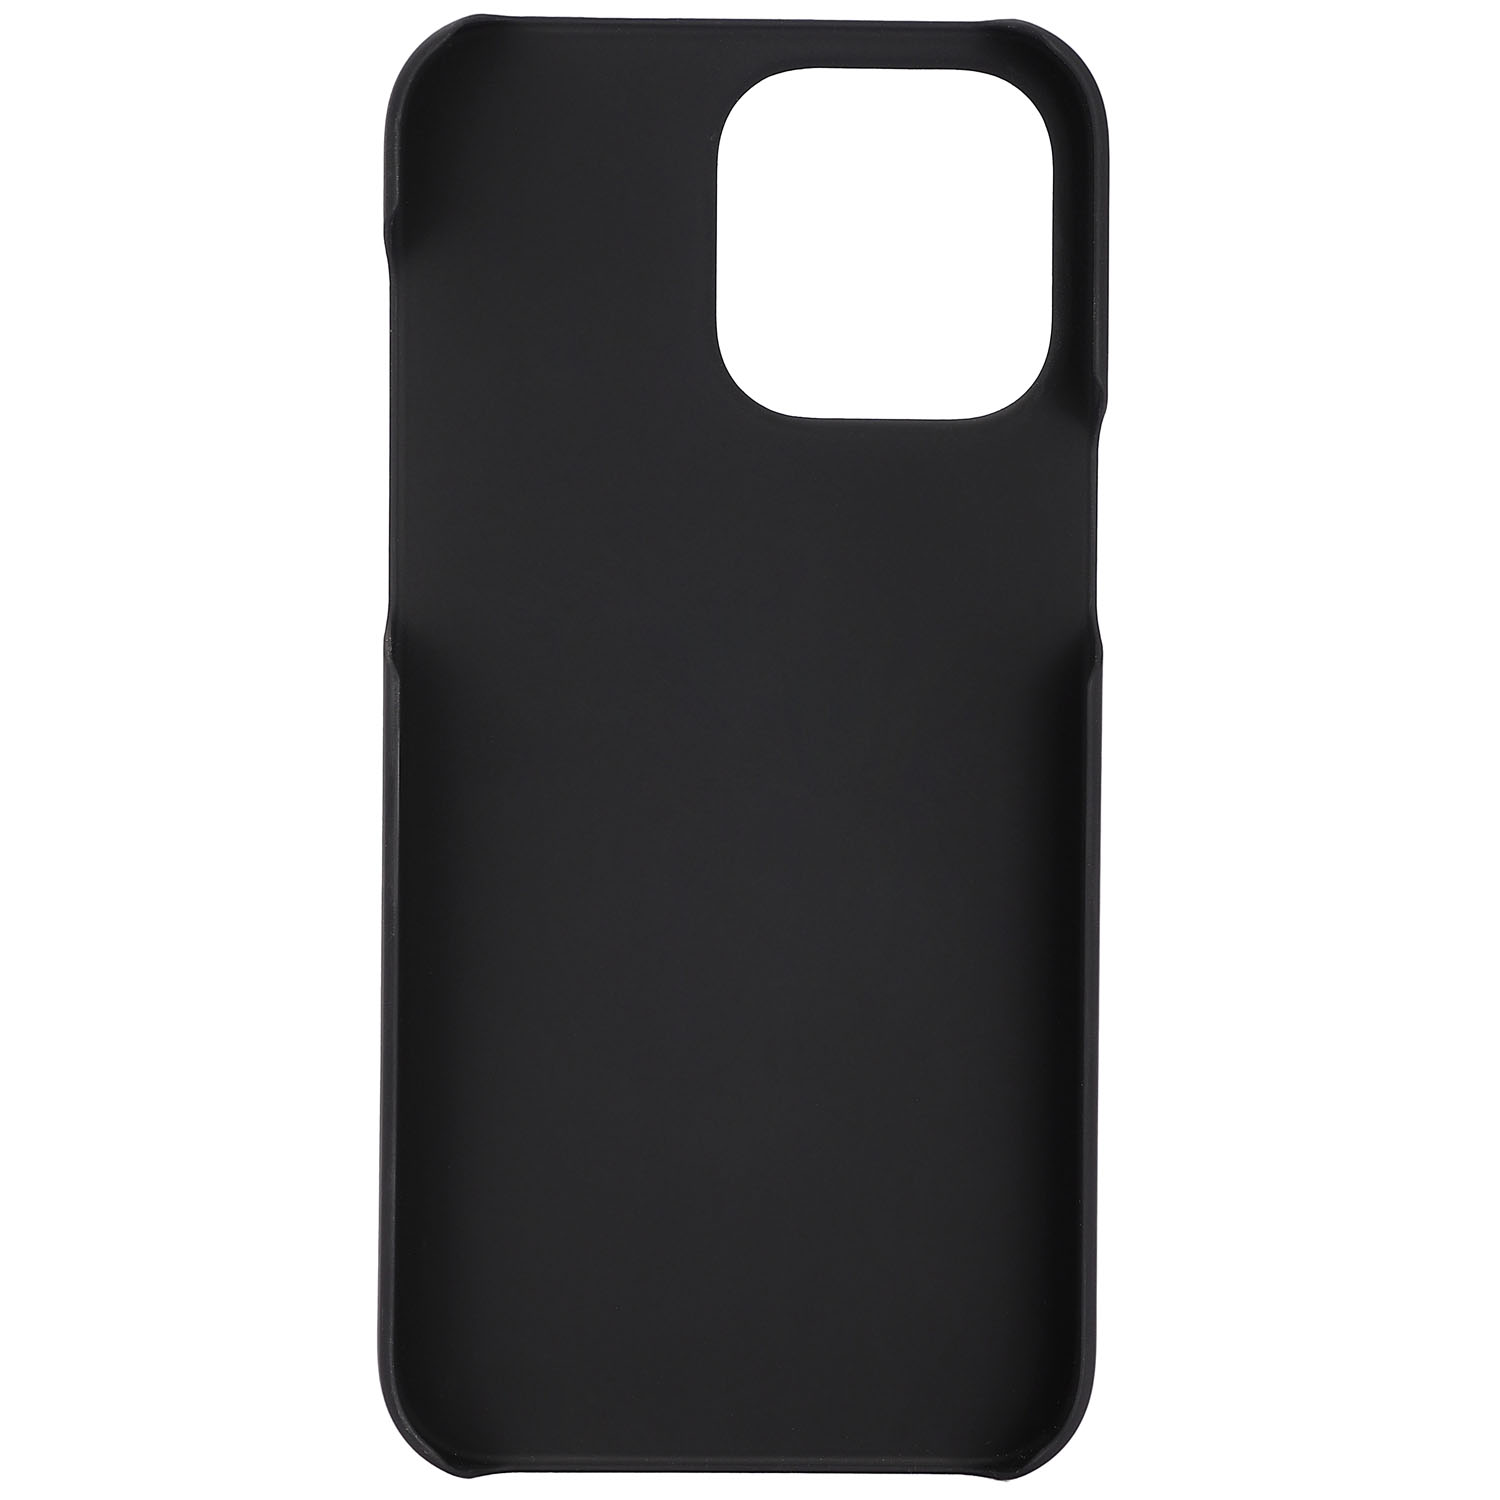 KRUSELL Leder CardCover iPhone iPhone Schwarz, Backcover, Max, 14 Schwarz 14 Pro Pro Apple, Max